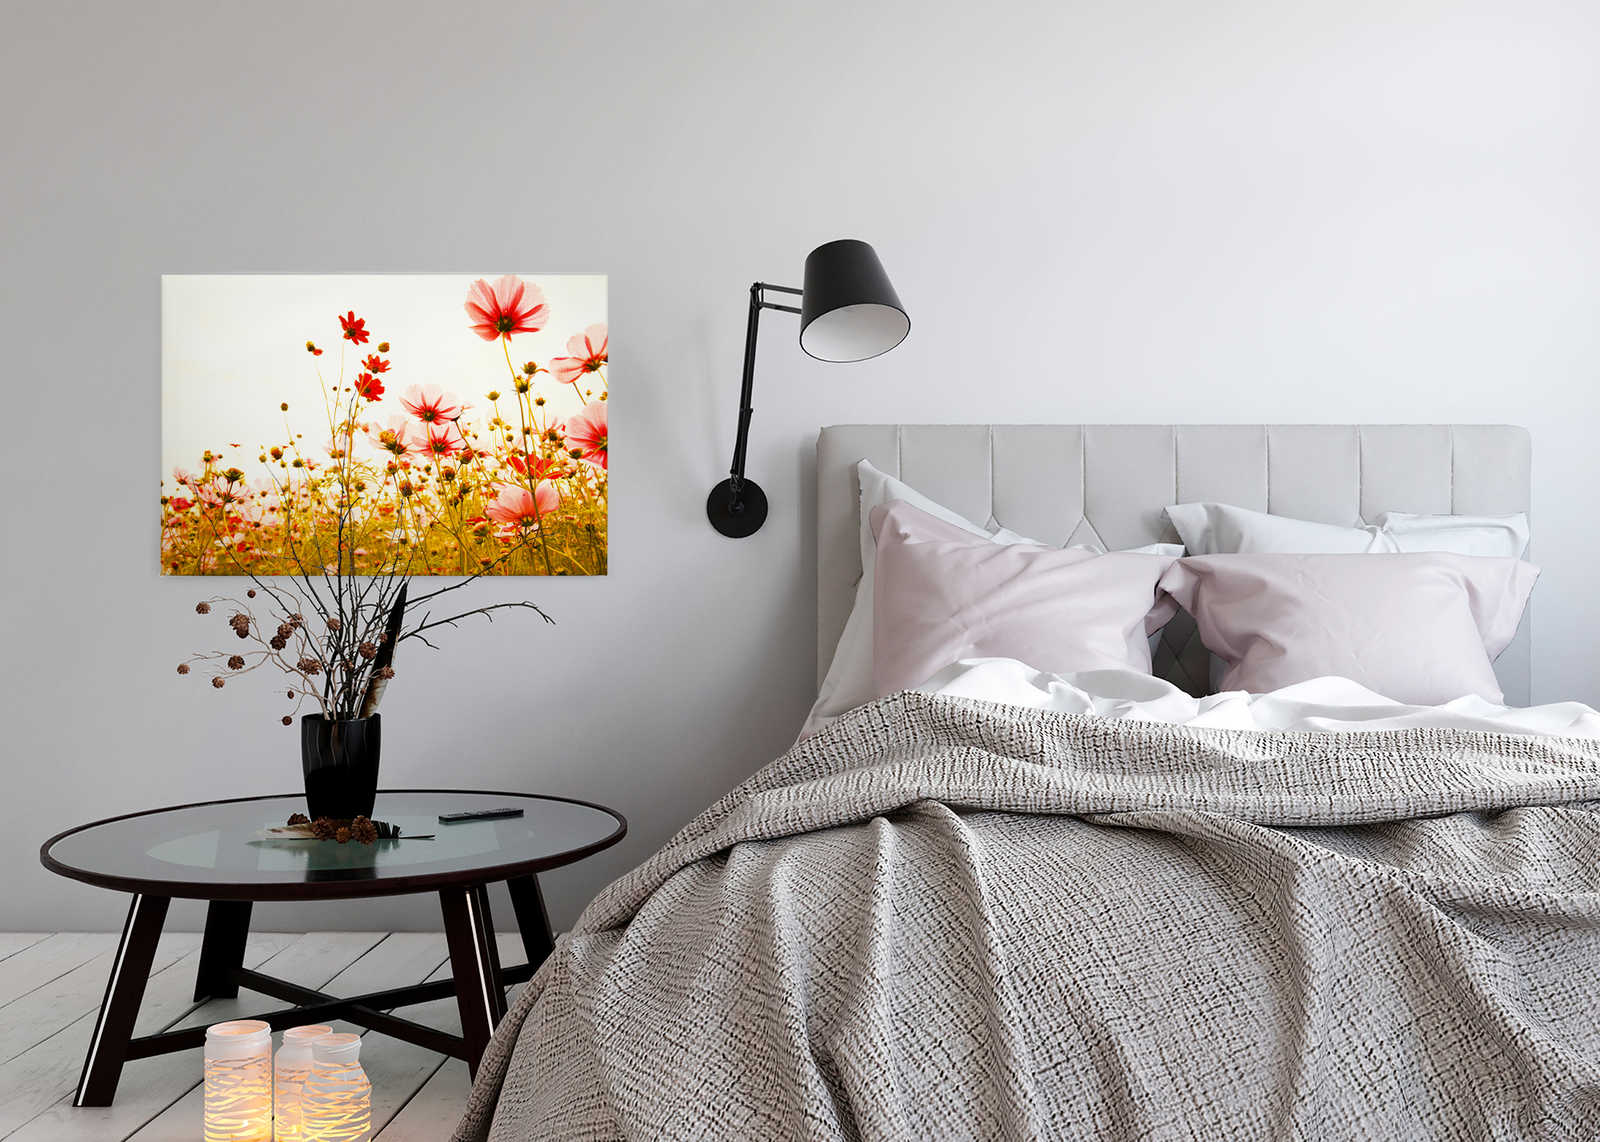             Canvas with flower meadow in spring | green, pink, white - 0.90 m x 0.60 m
        